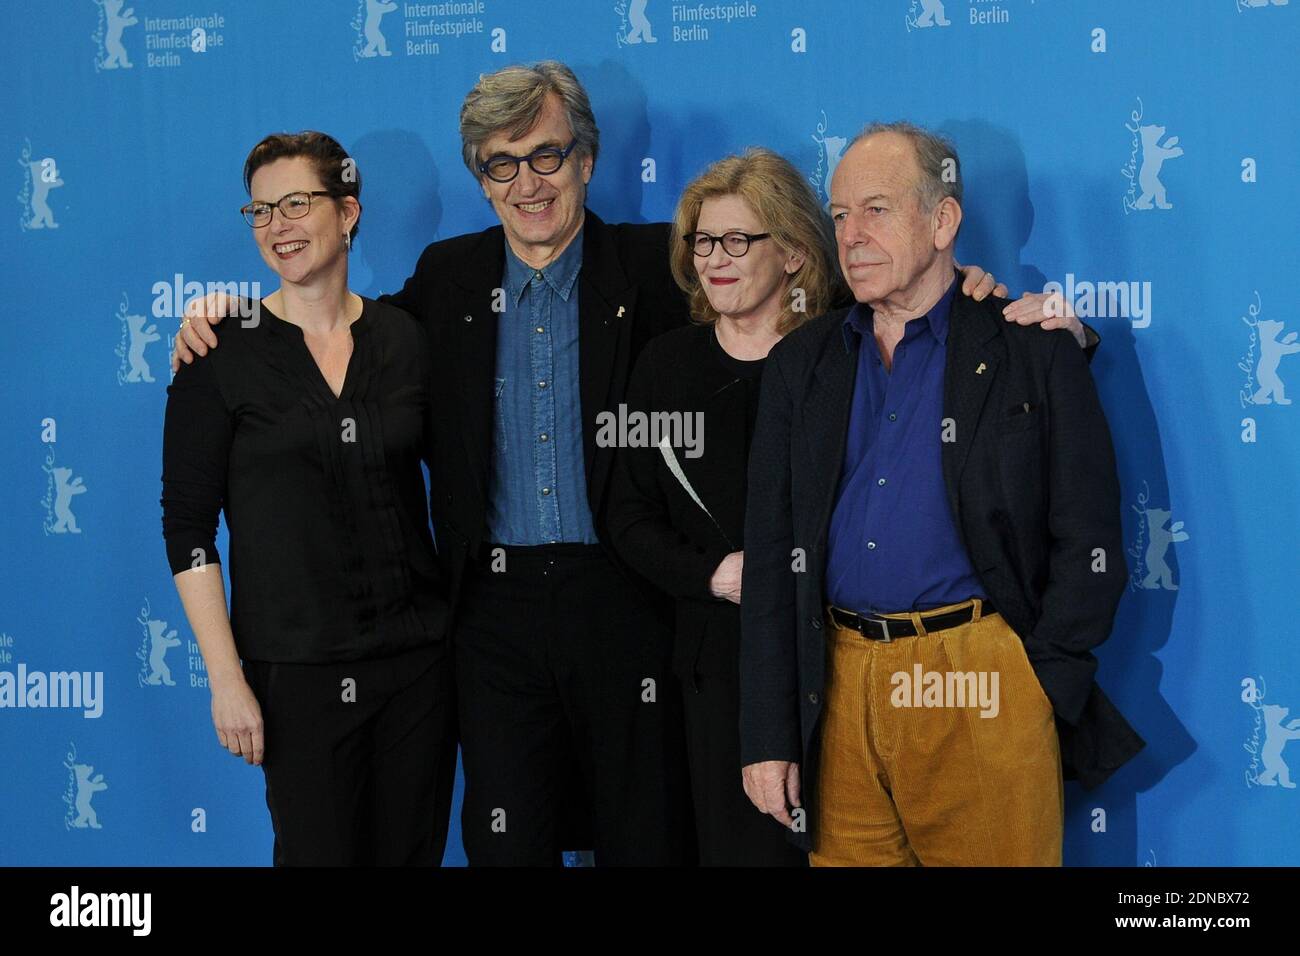 Yella Rottlaender, Director Wim Wenders, Lisa Kreuzer and Ruediger Vogler attending the 'Honorary Golden Bear For Wim Wenders' Photocall during the 65th Berlinale, Berlin International Film Festival, in Berlin, Germany on February 12, 2015. Photo by Aurore Marechal/ABACAPRESS.COM Stock Photo